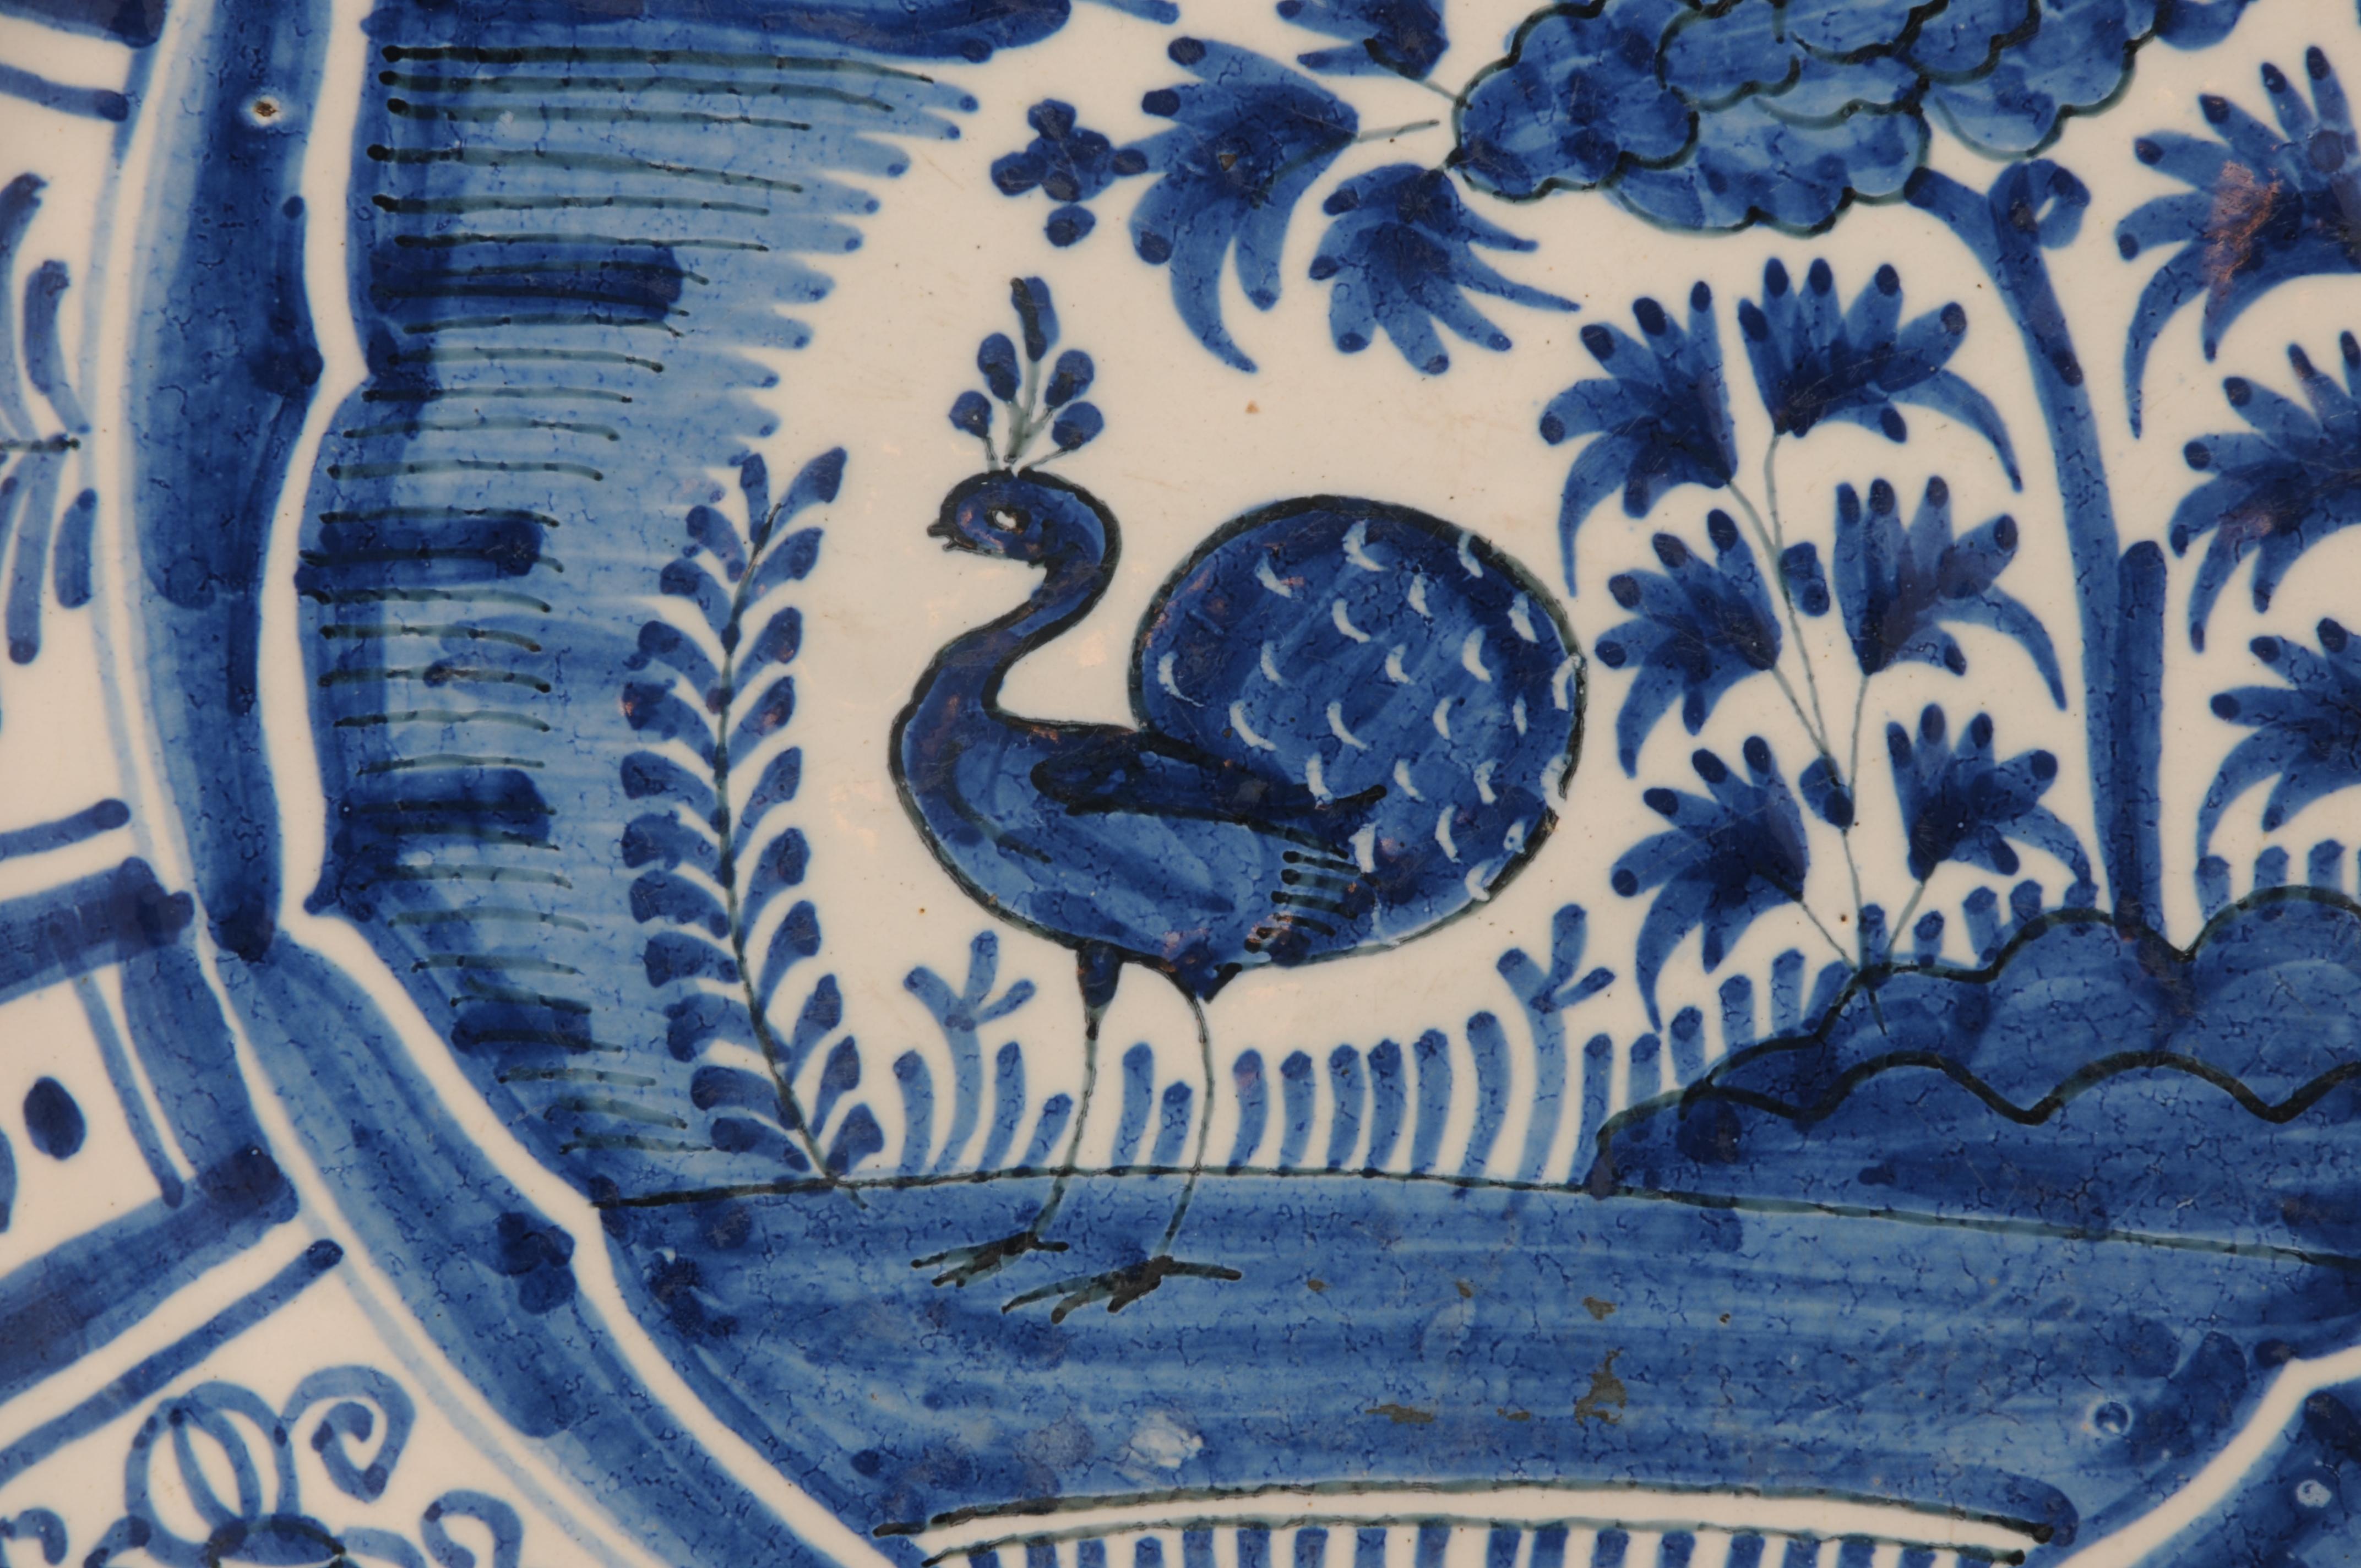 Glazed Delft - Wanli style 'Kraak' Charger For Sale